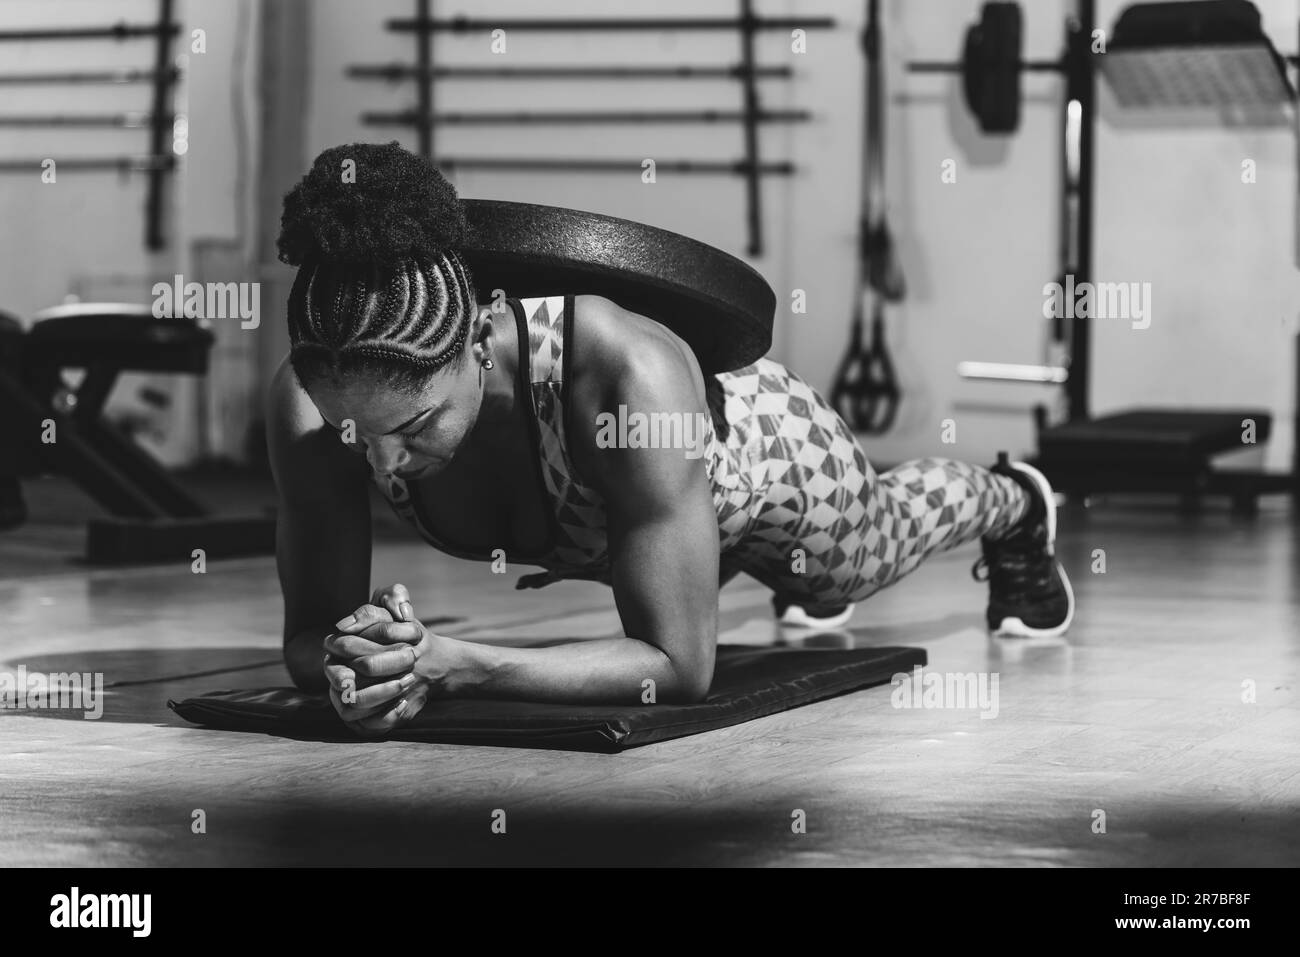 An athletic female fitness enthusiast engaging in a weighted planking exercise, demonstrating strength, balance, and determination Stock Photo